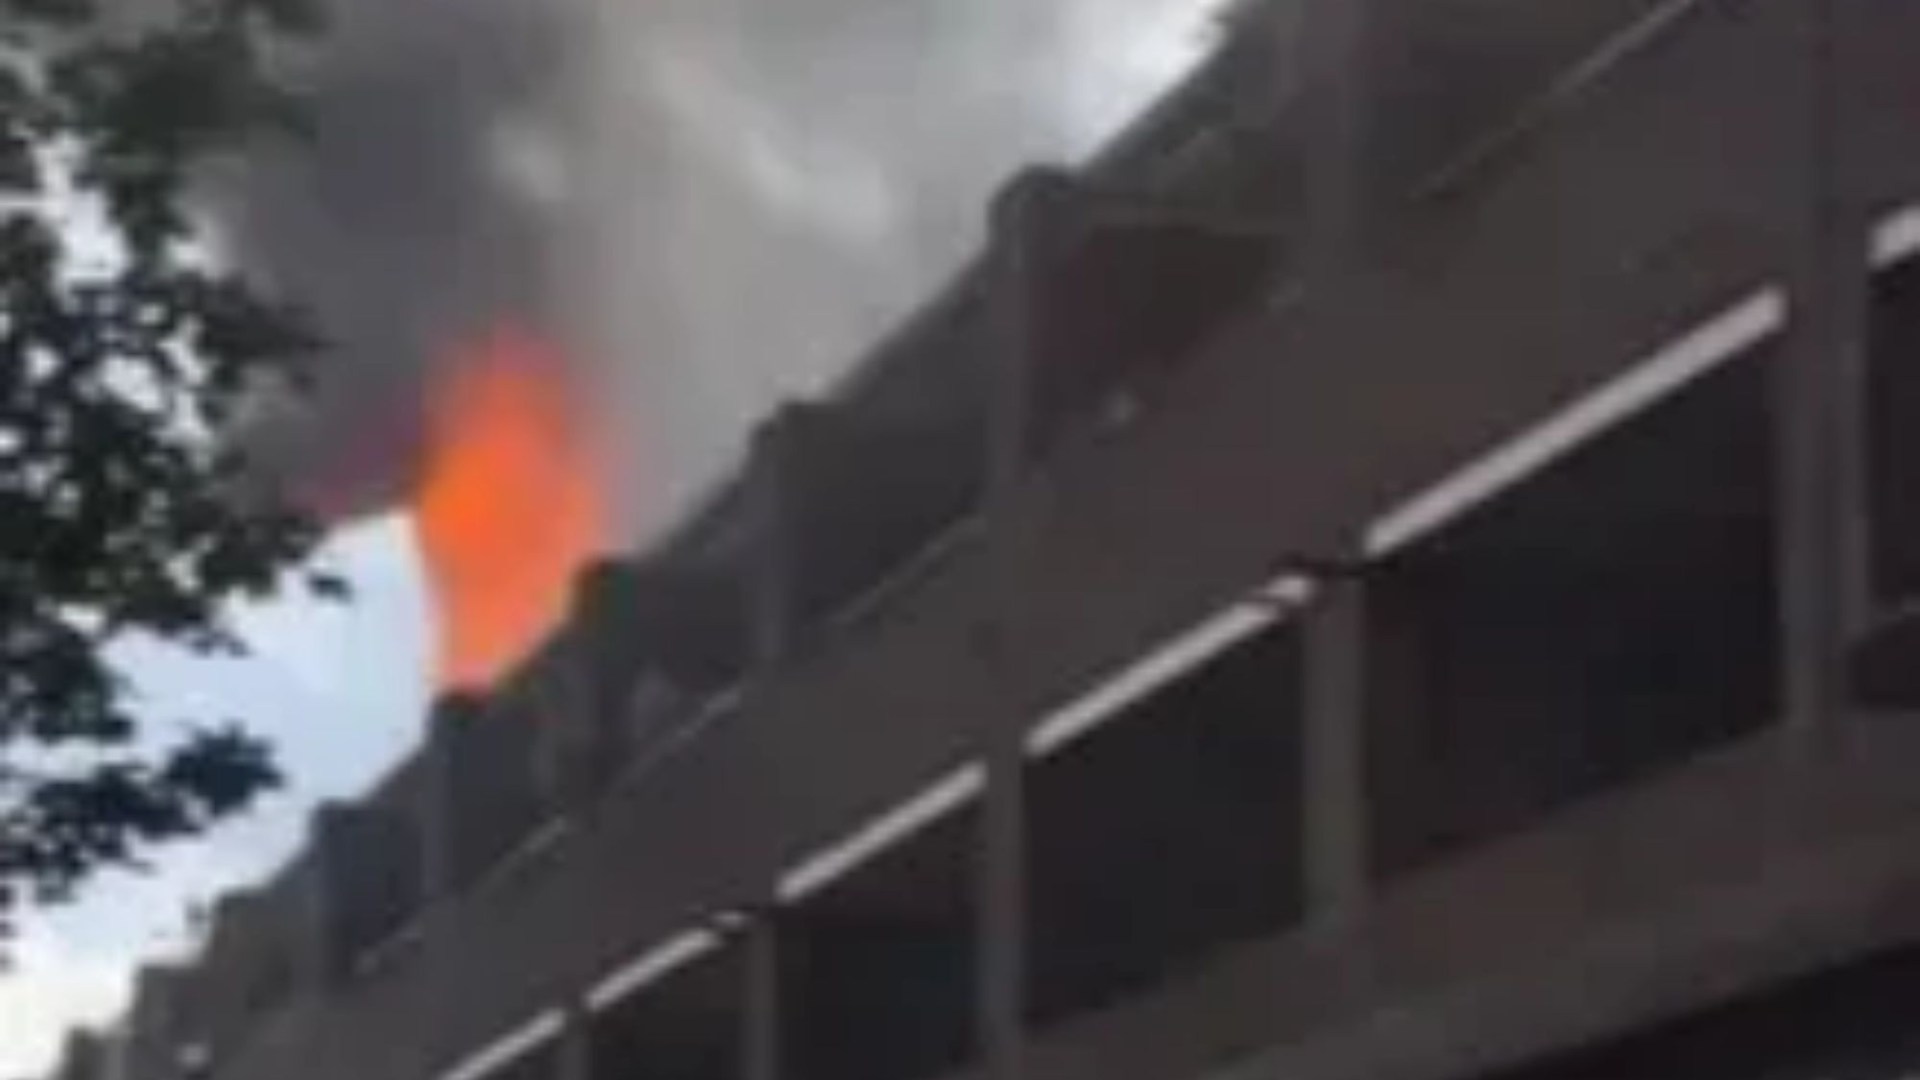 Hackney fire: Flames & smoke engulf London flats after blaze erupts with terrified residents fleeing their...